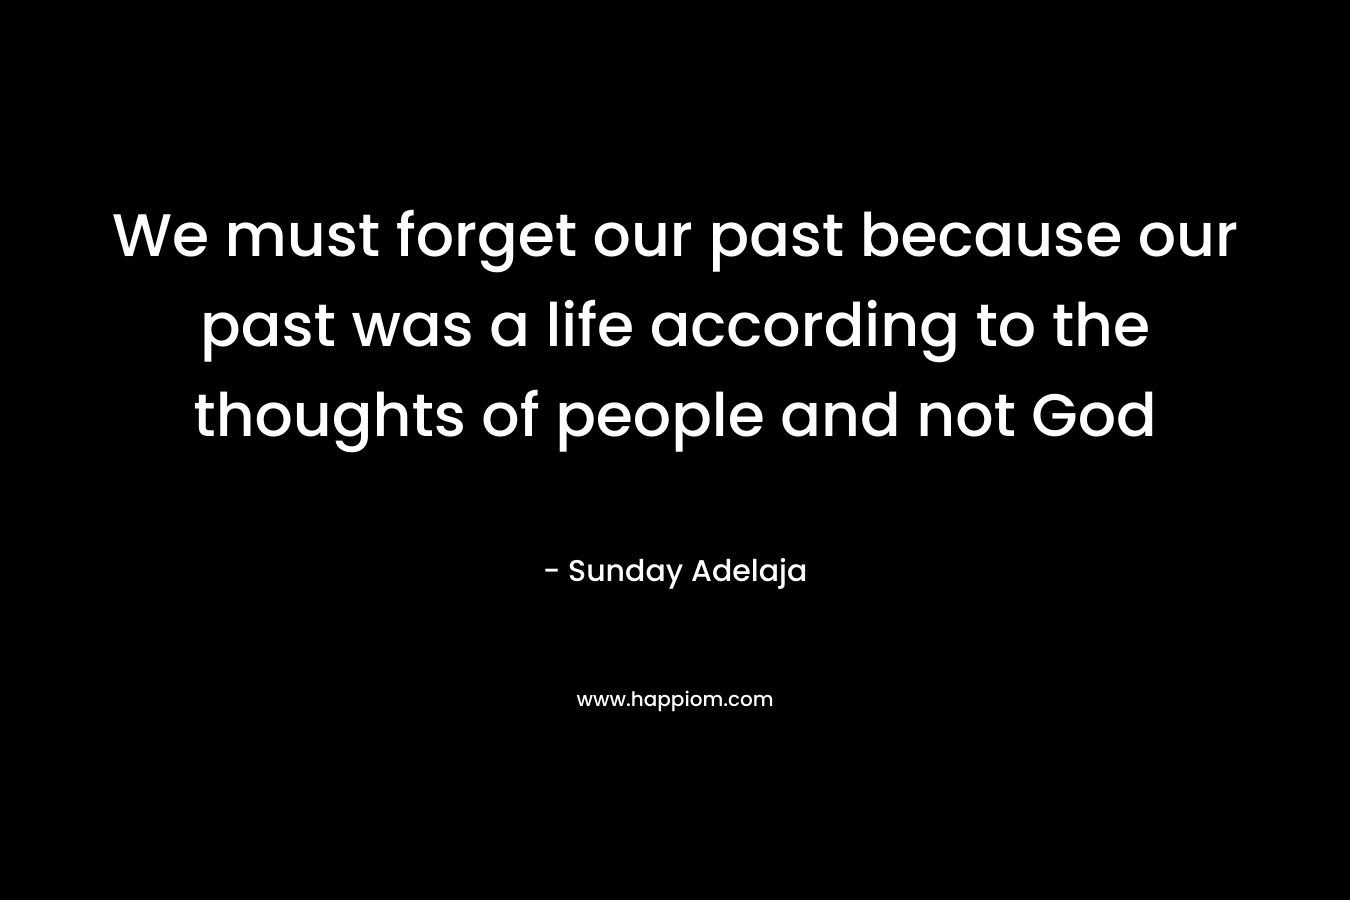 We must forget our past because our past was a life according to the thoughts of people and not God